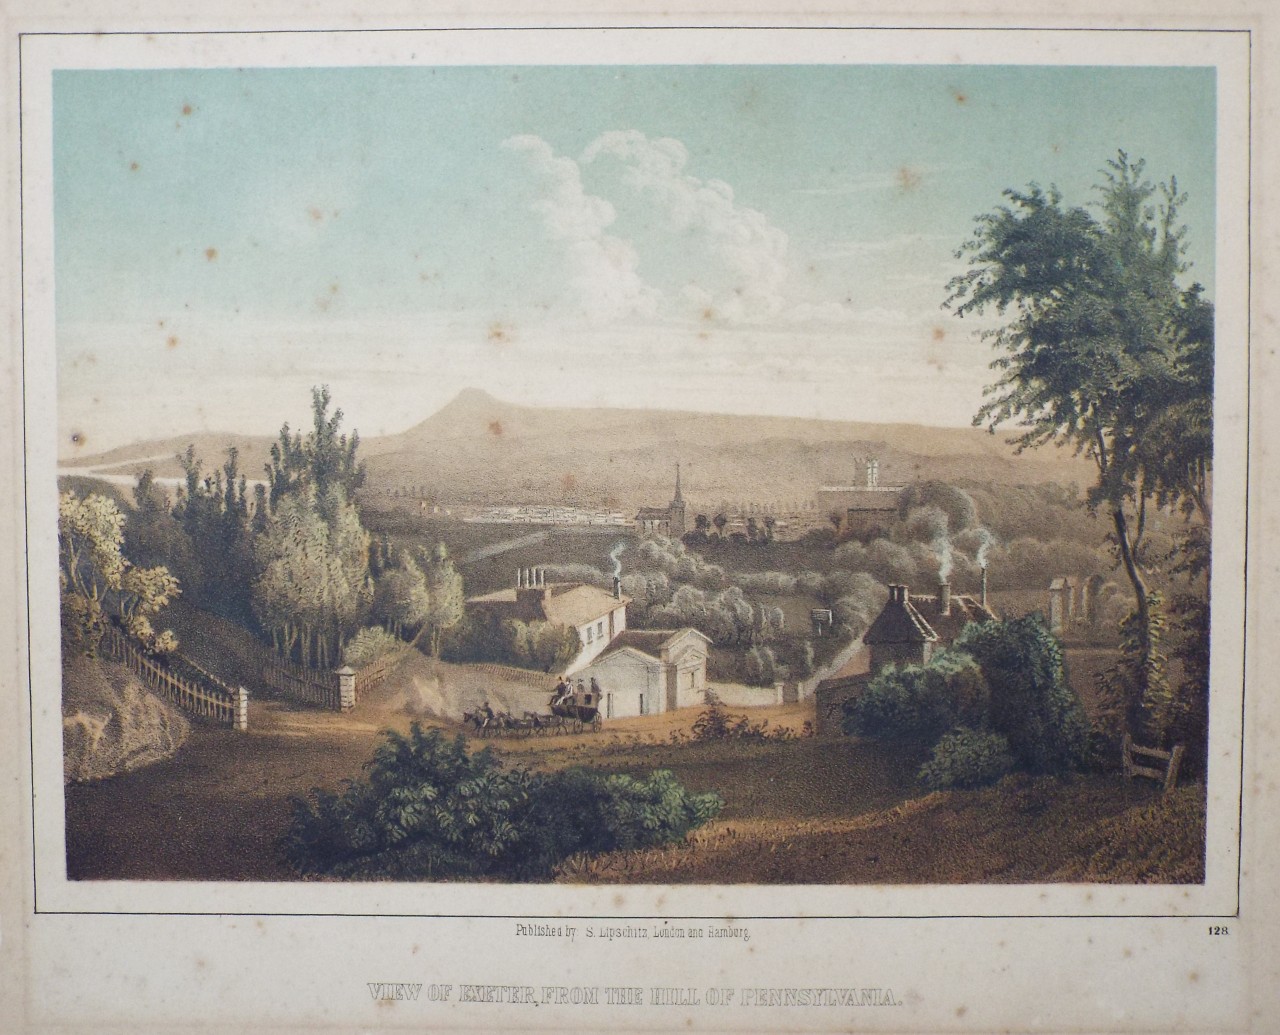 Lithograph - View of Exeter, from the Hill of Pennsylvalia.